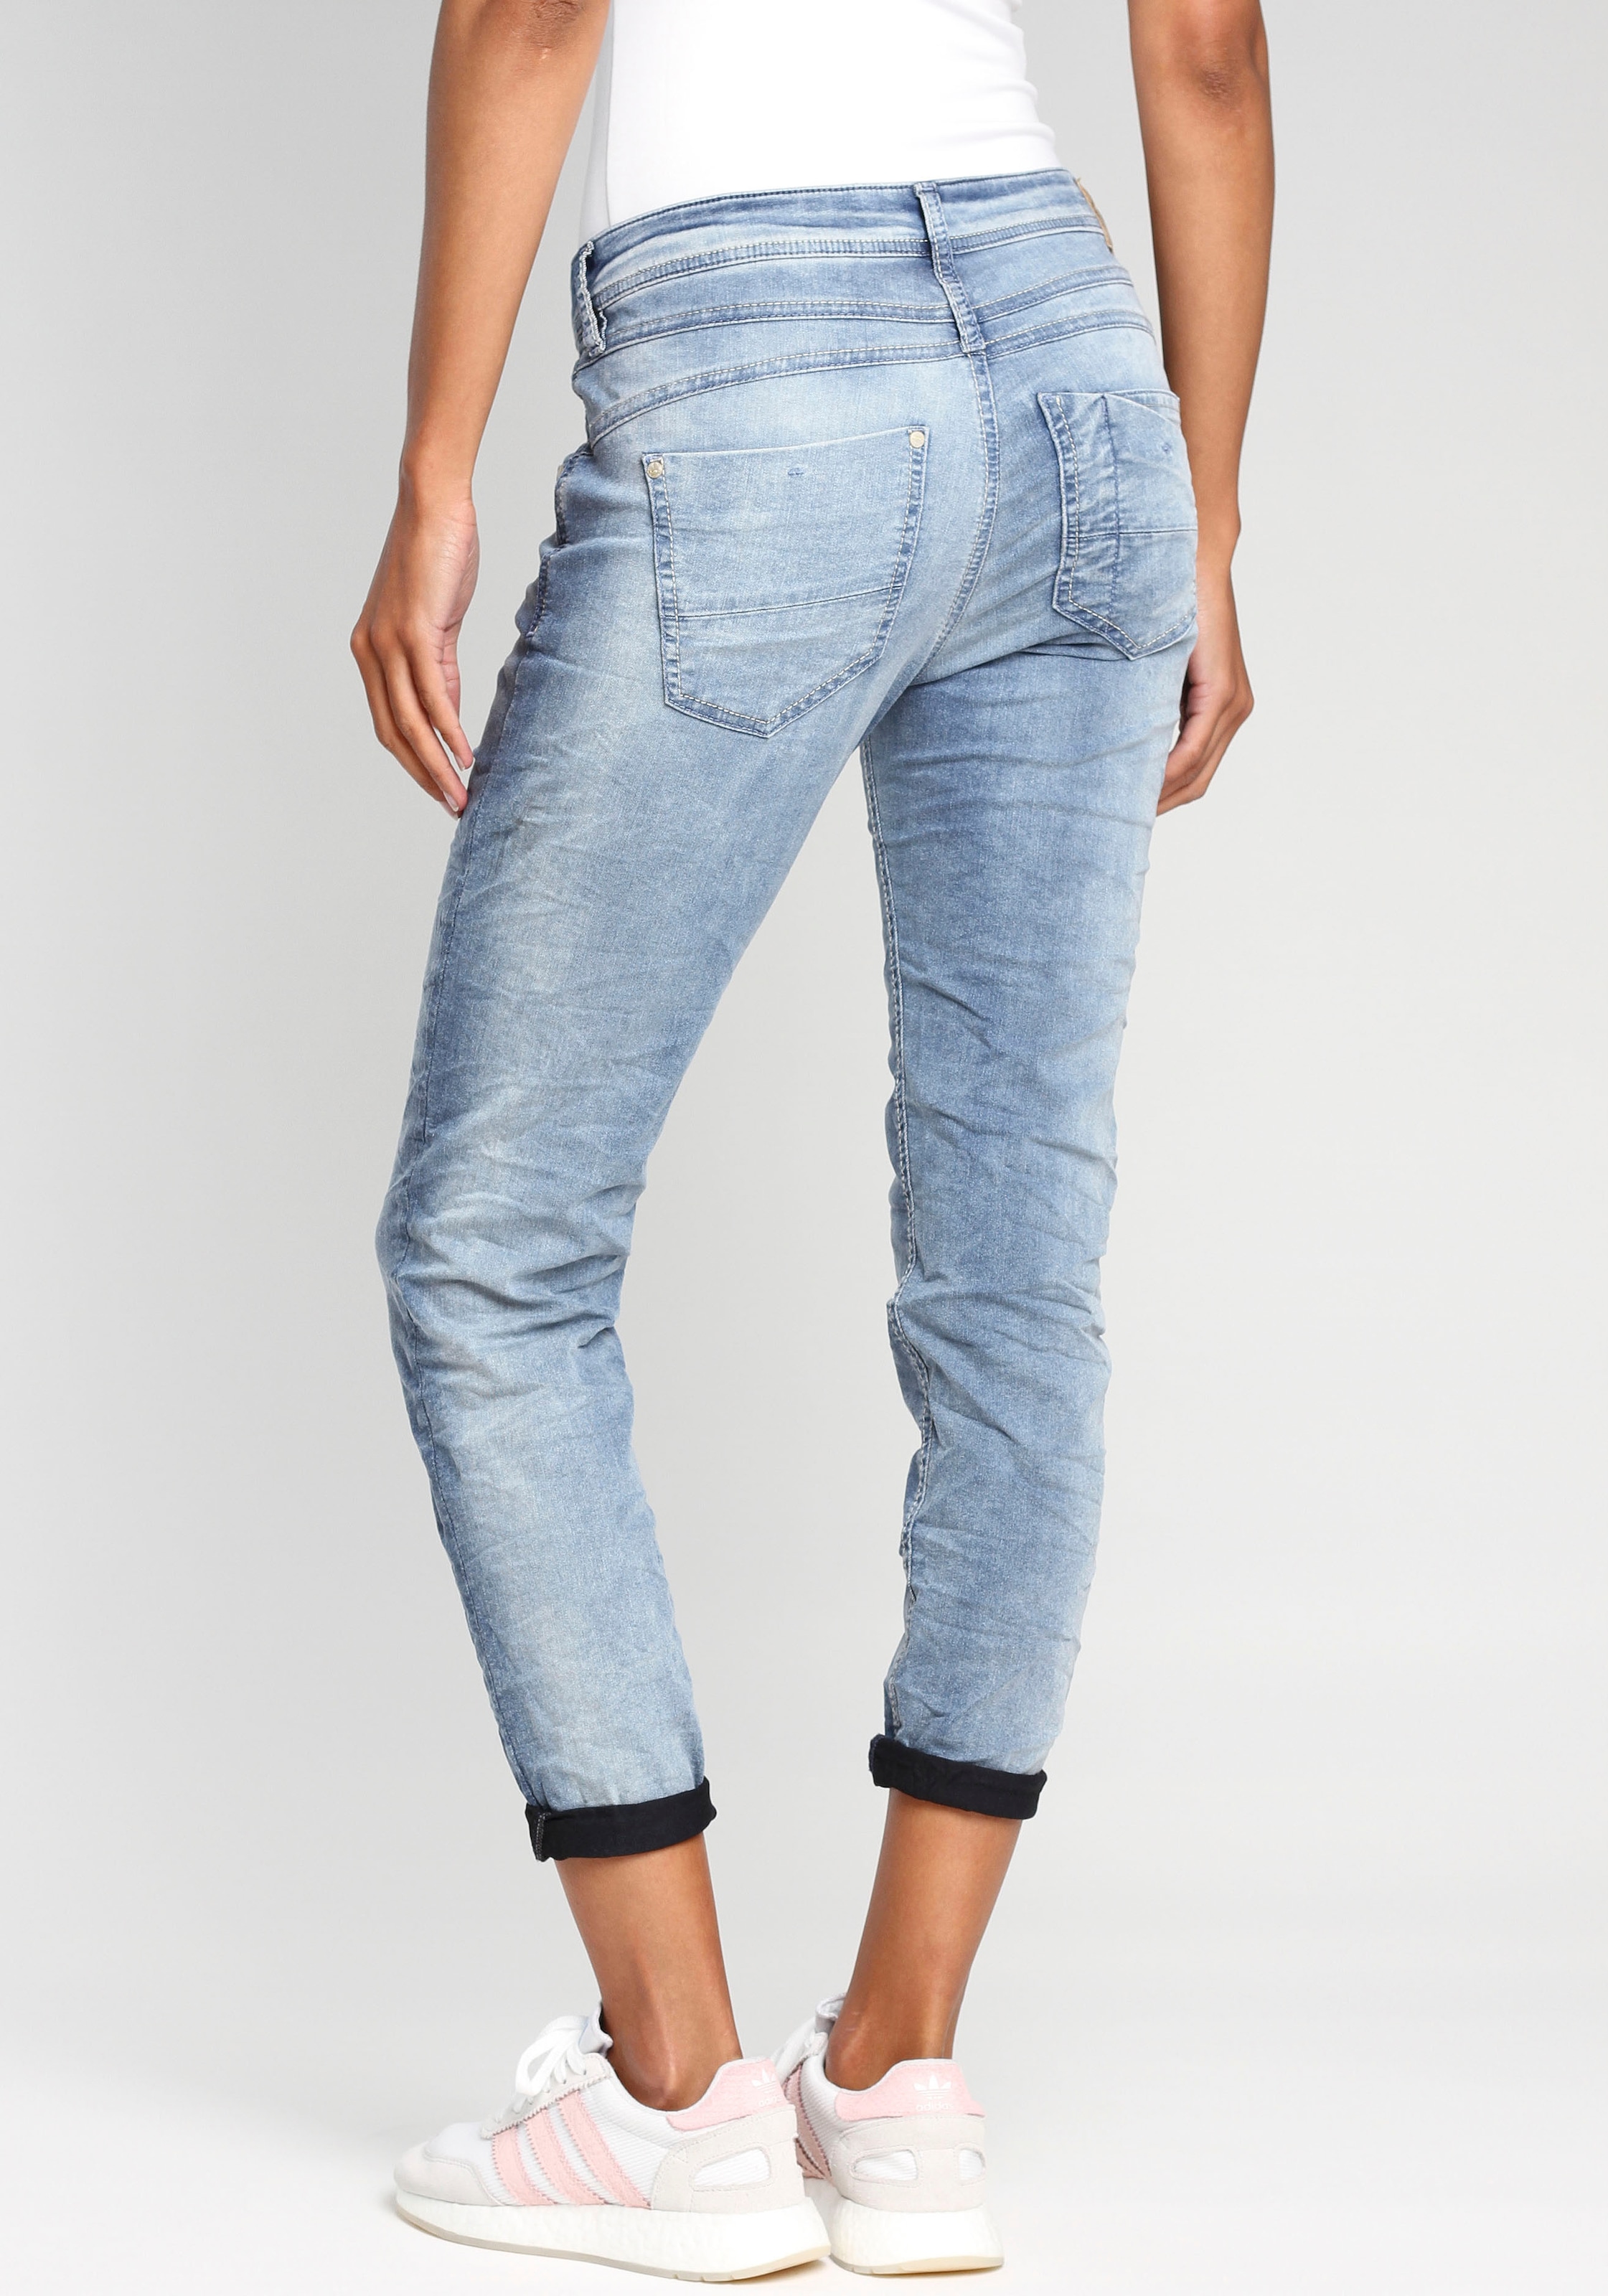 online in Relax-fit-Jeans GANG OTTO cooler Used Waschung bei »94Amelie«,